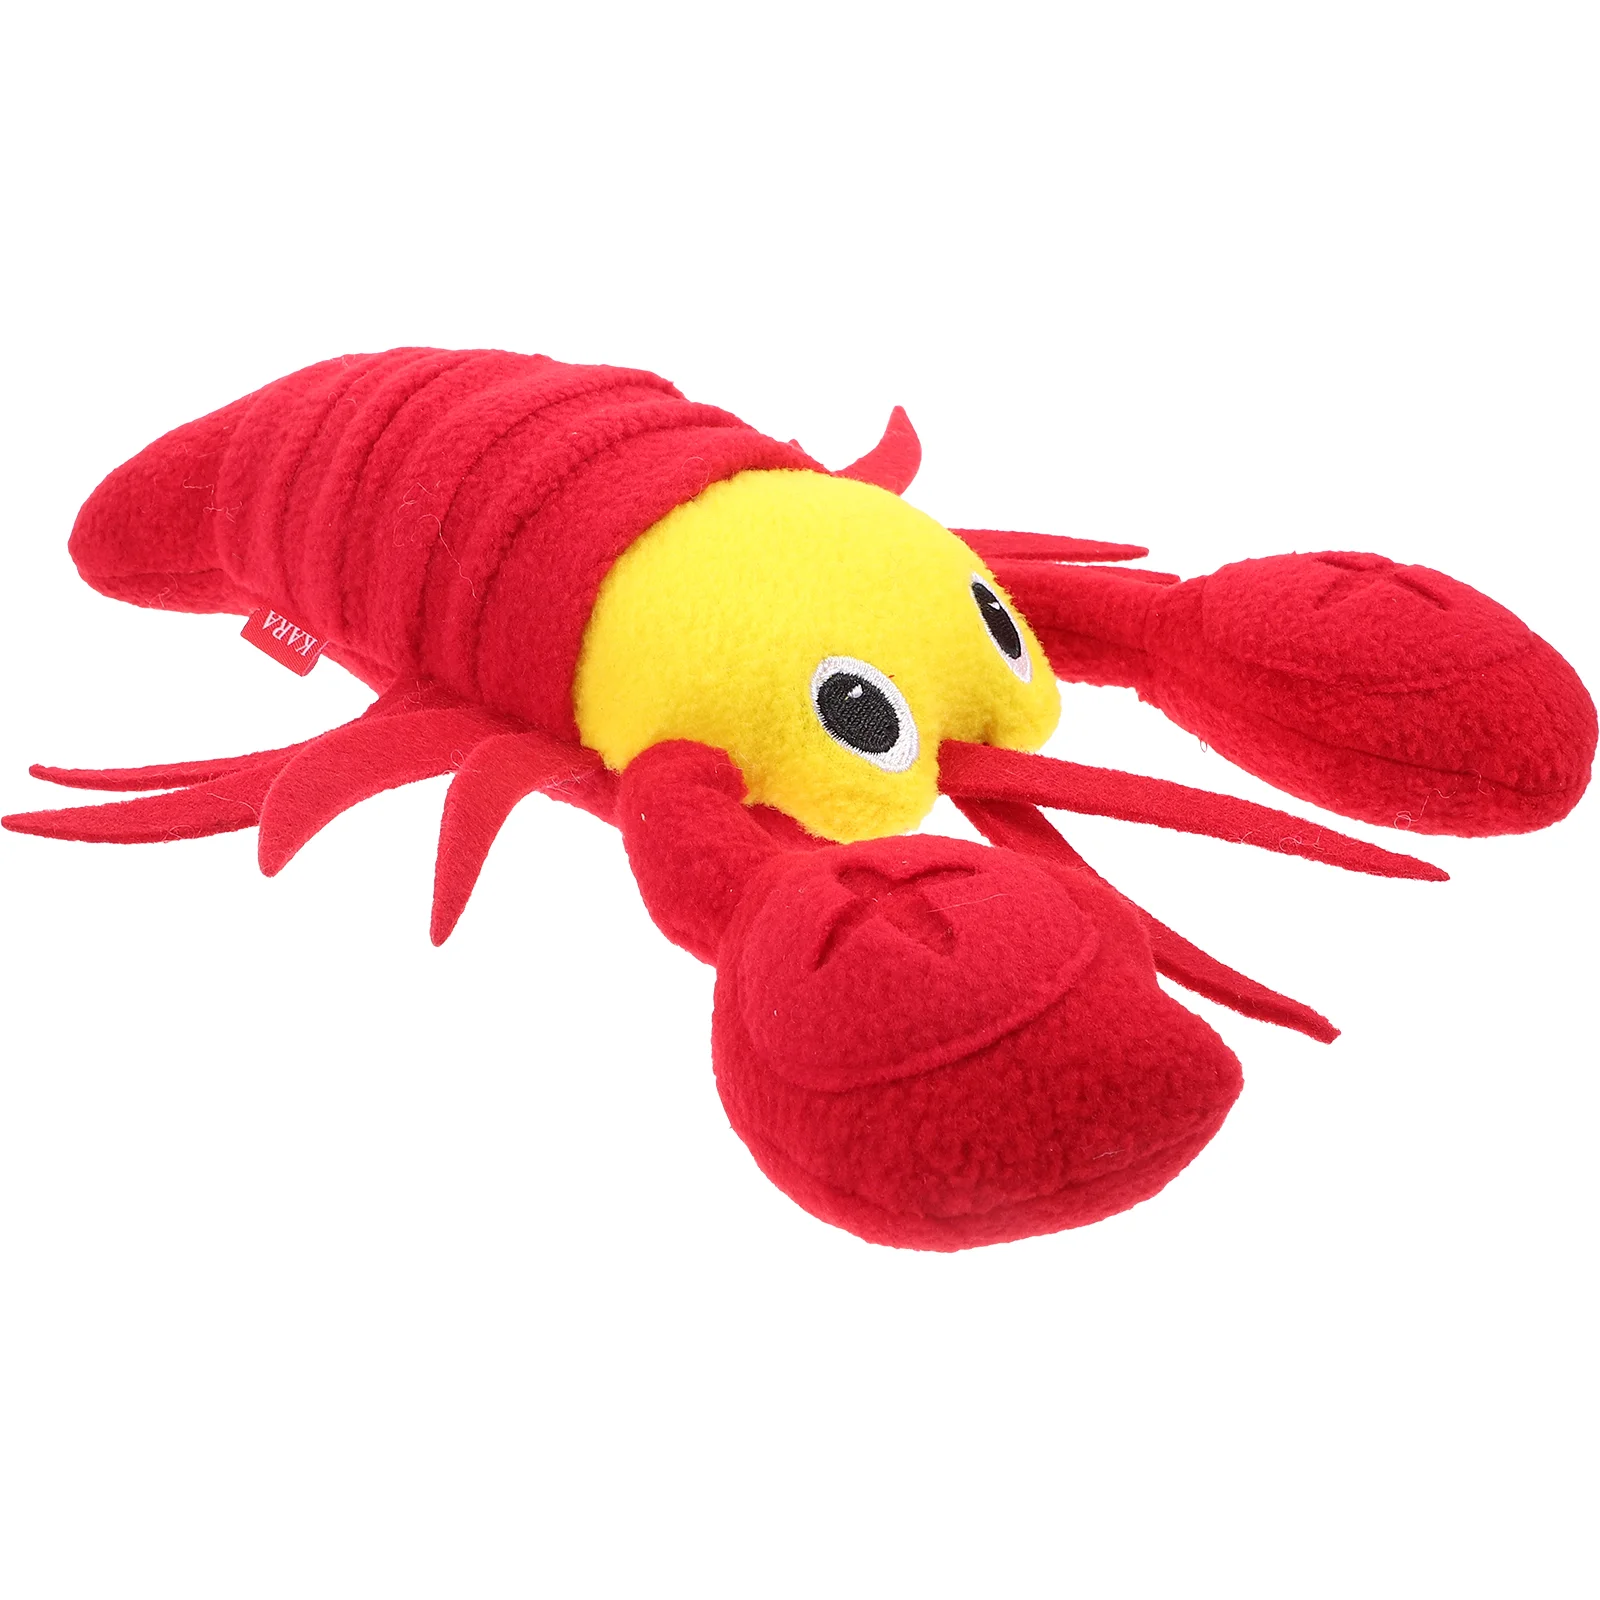 

Toys Puppies Pet Plush Squeaky Dog Small Dogs Pets Chewing Interactive Stuffed Crayfish Teething Biting Lovely